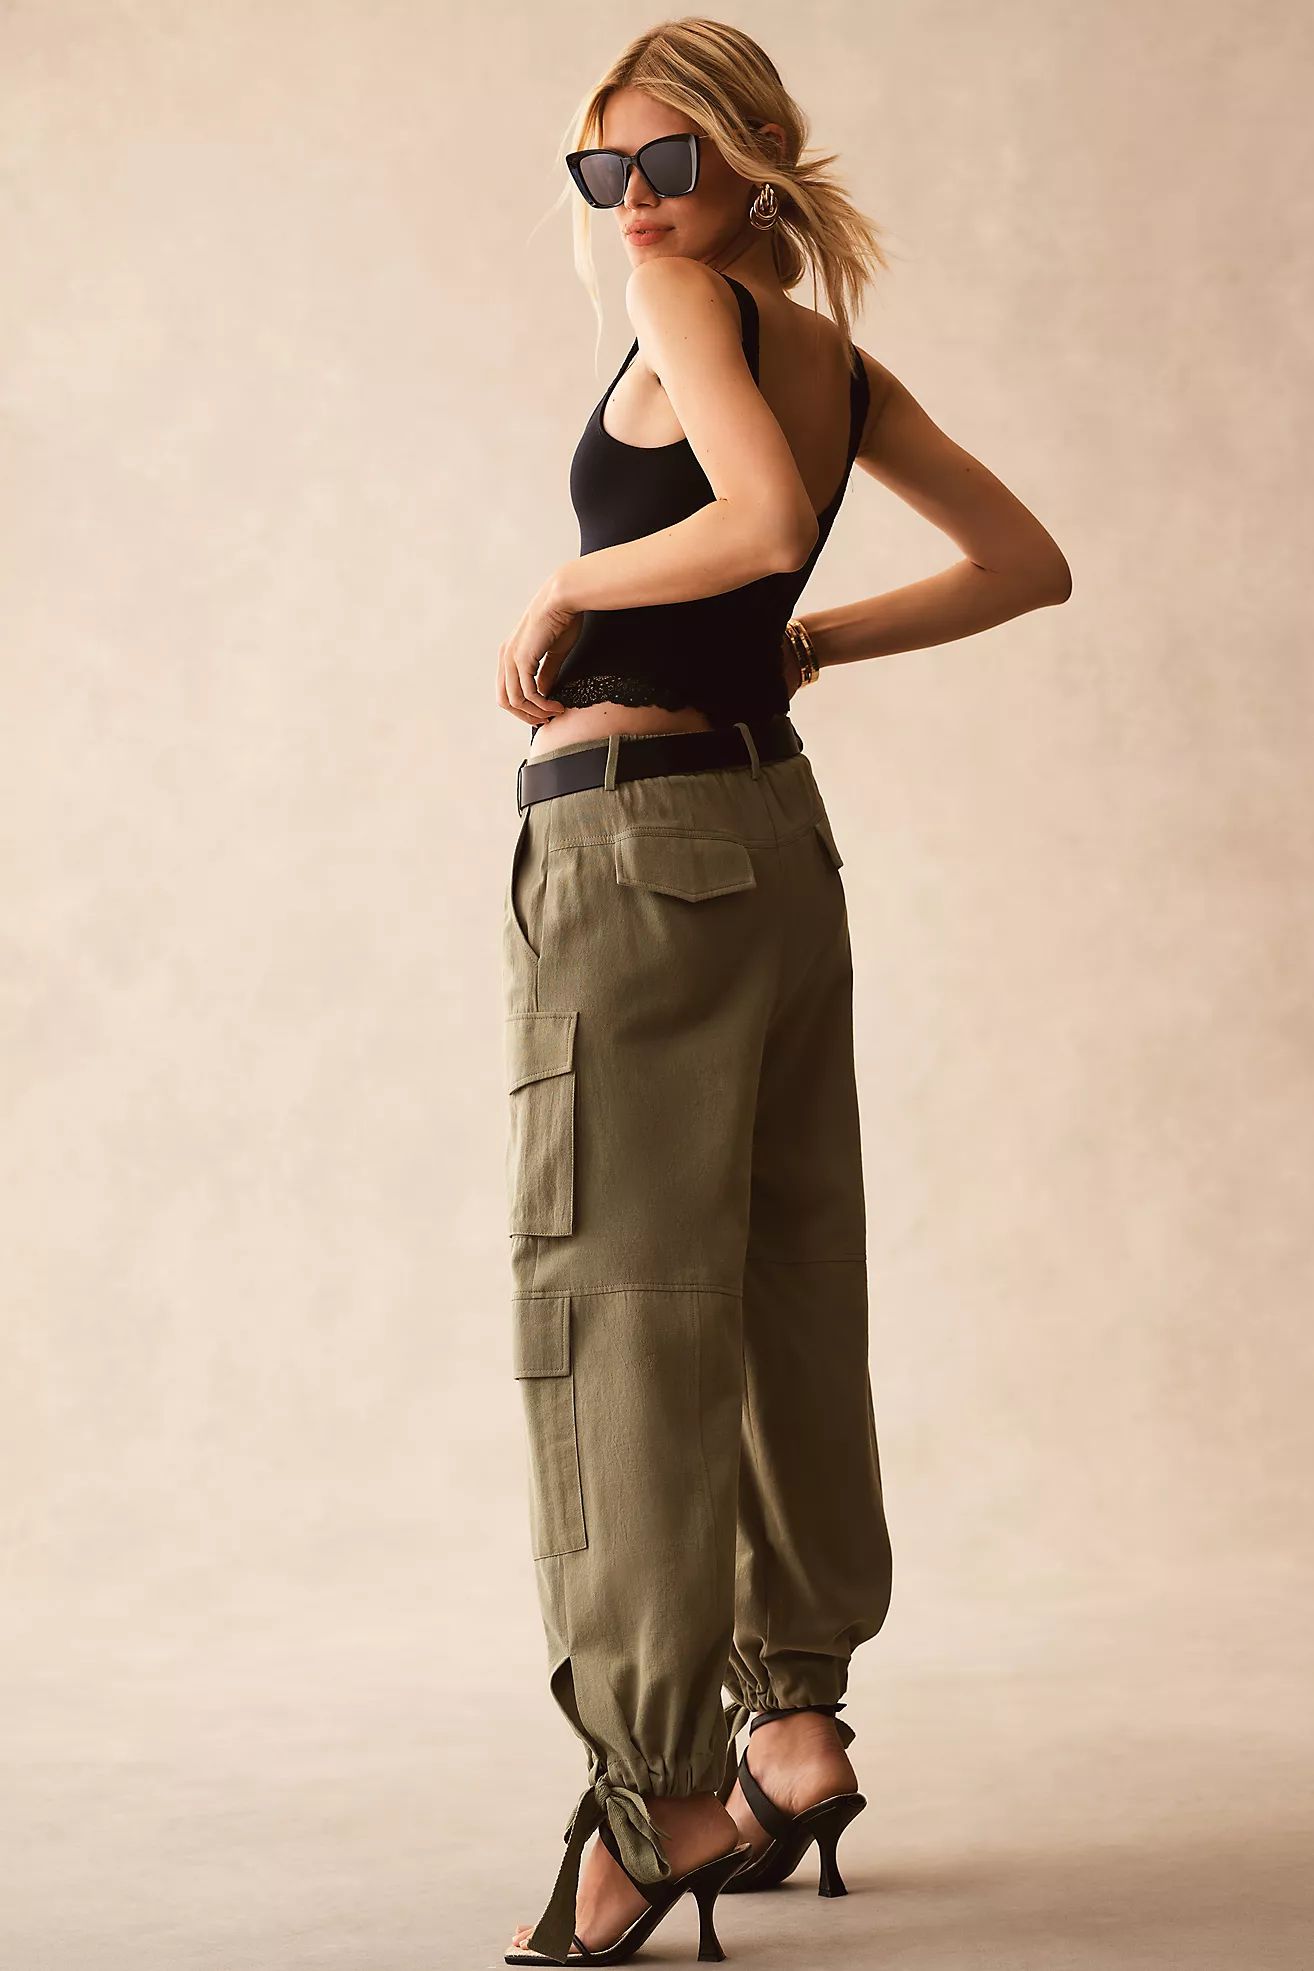 If By Sea Cargo Pants | Anthropologie (US)